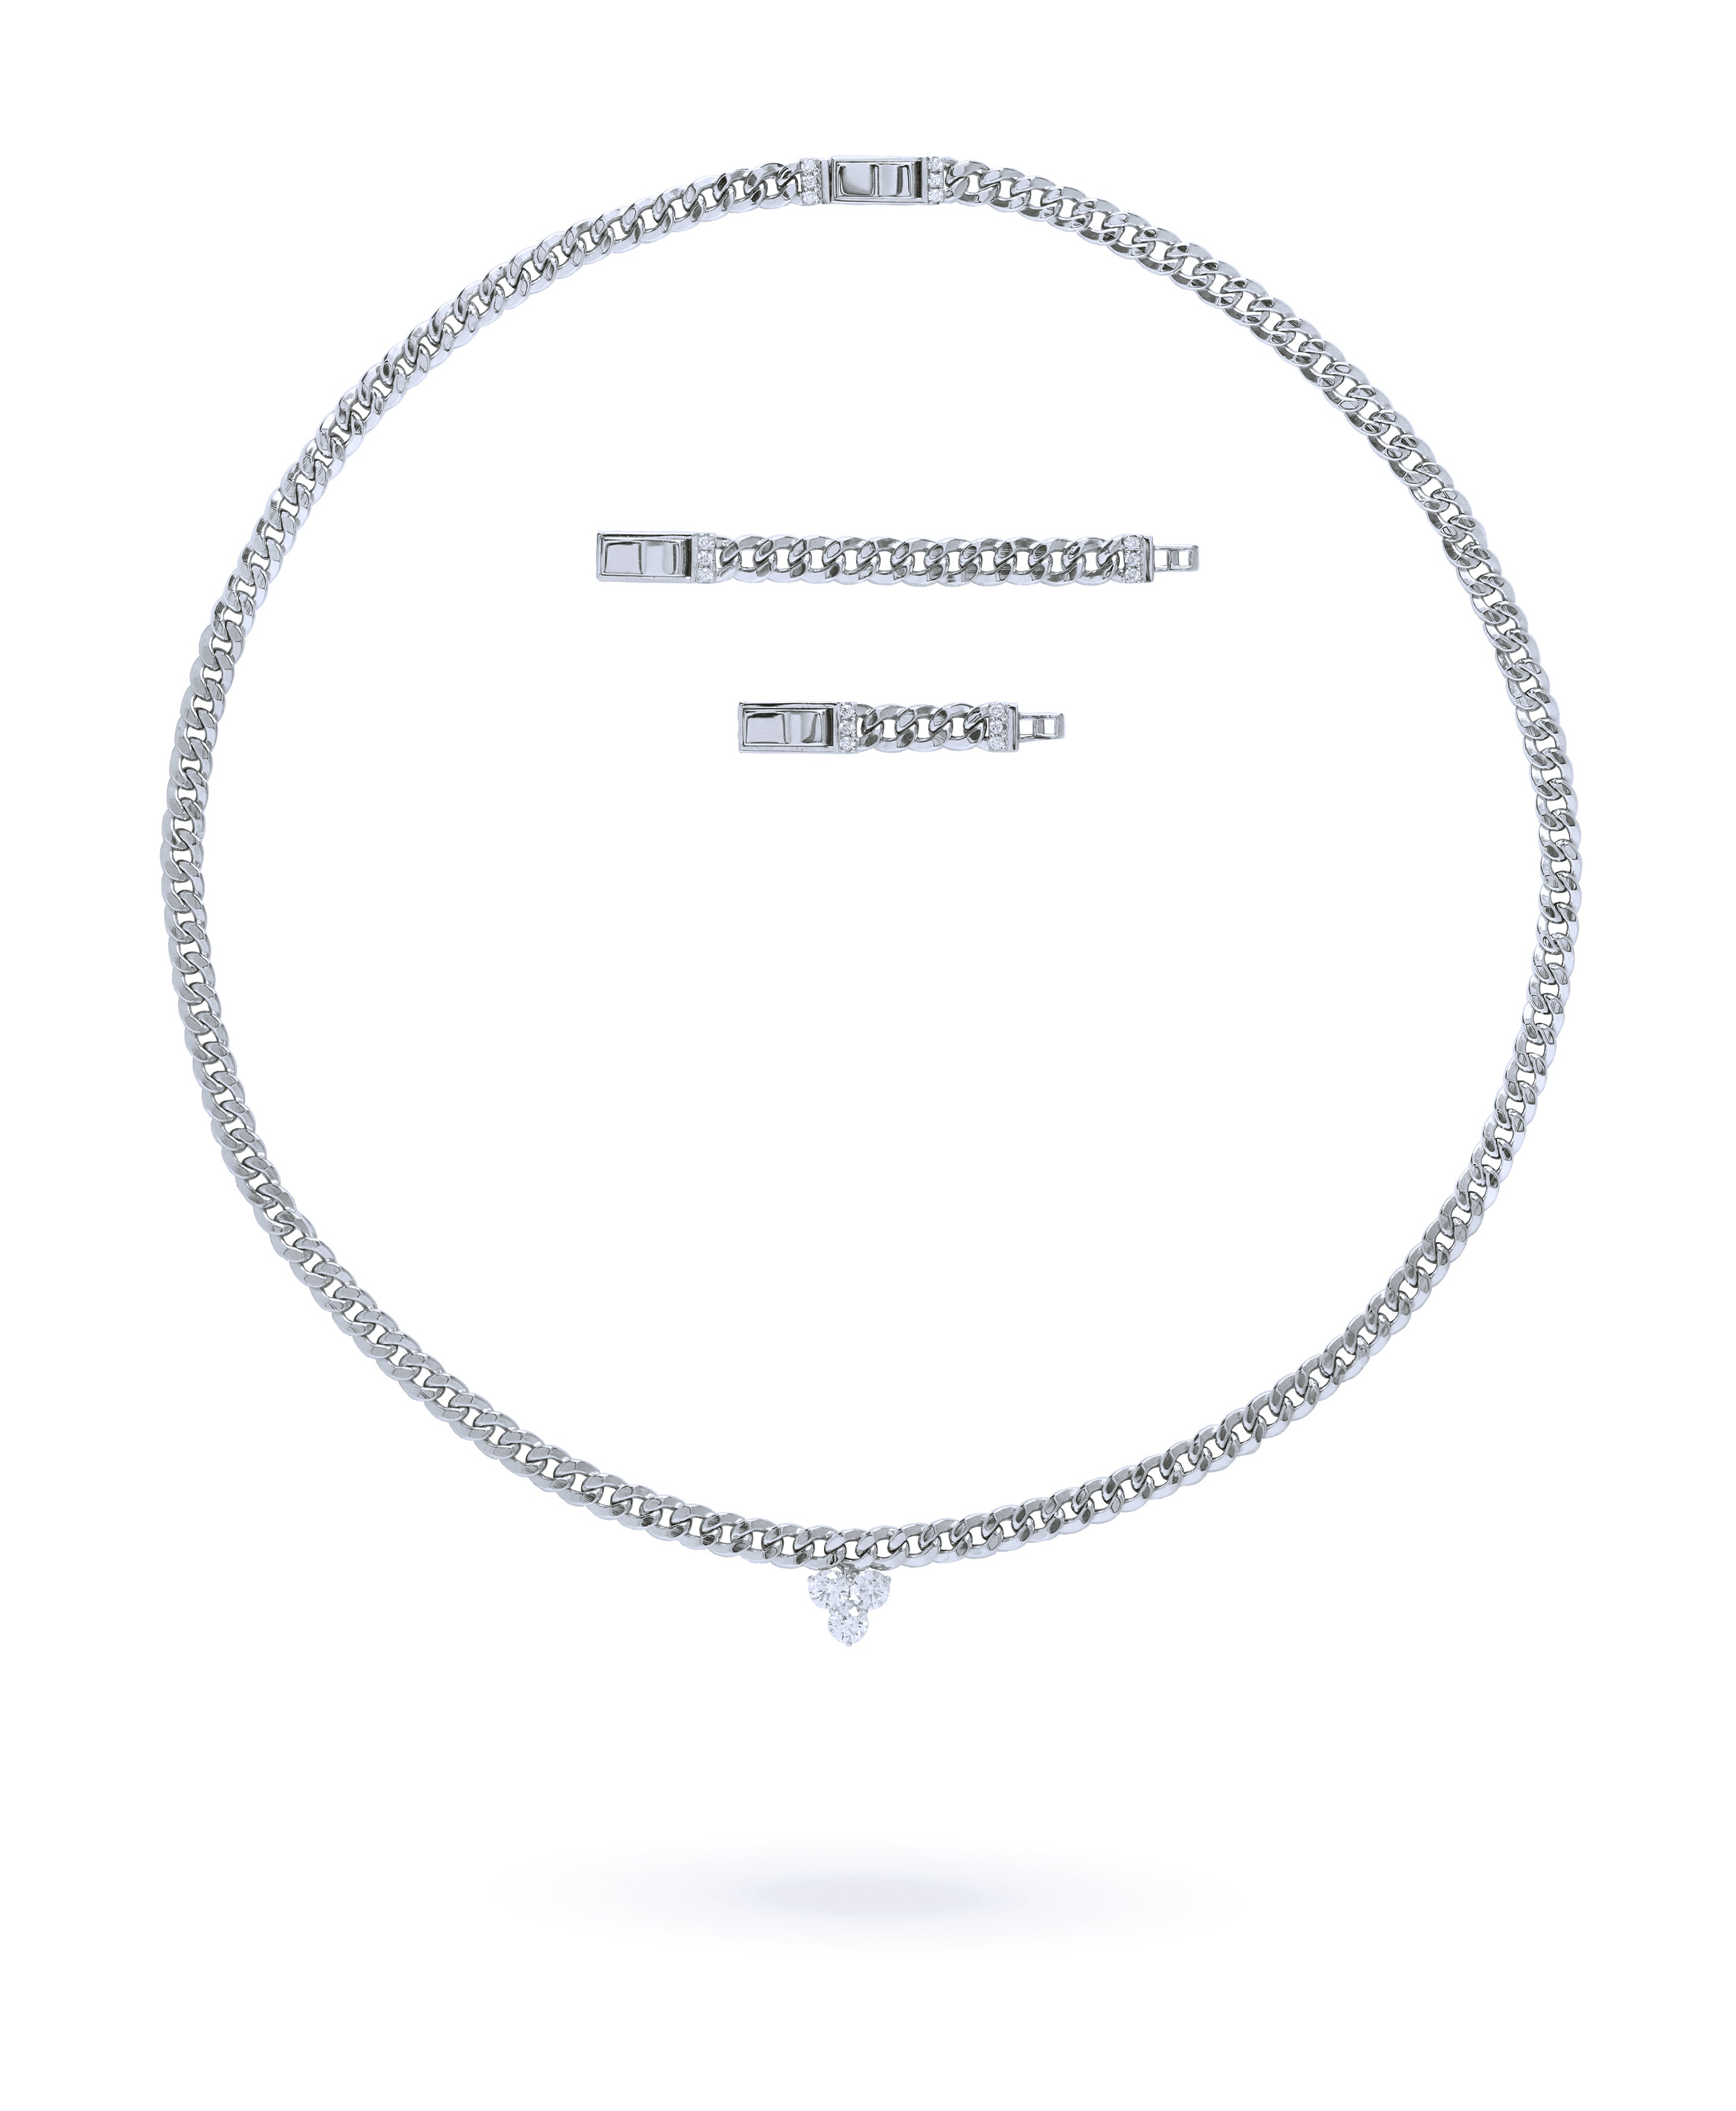 Trinity Diamonds Chain Necklace with Extensions in White Gold